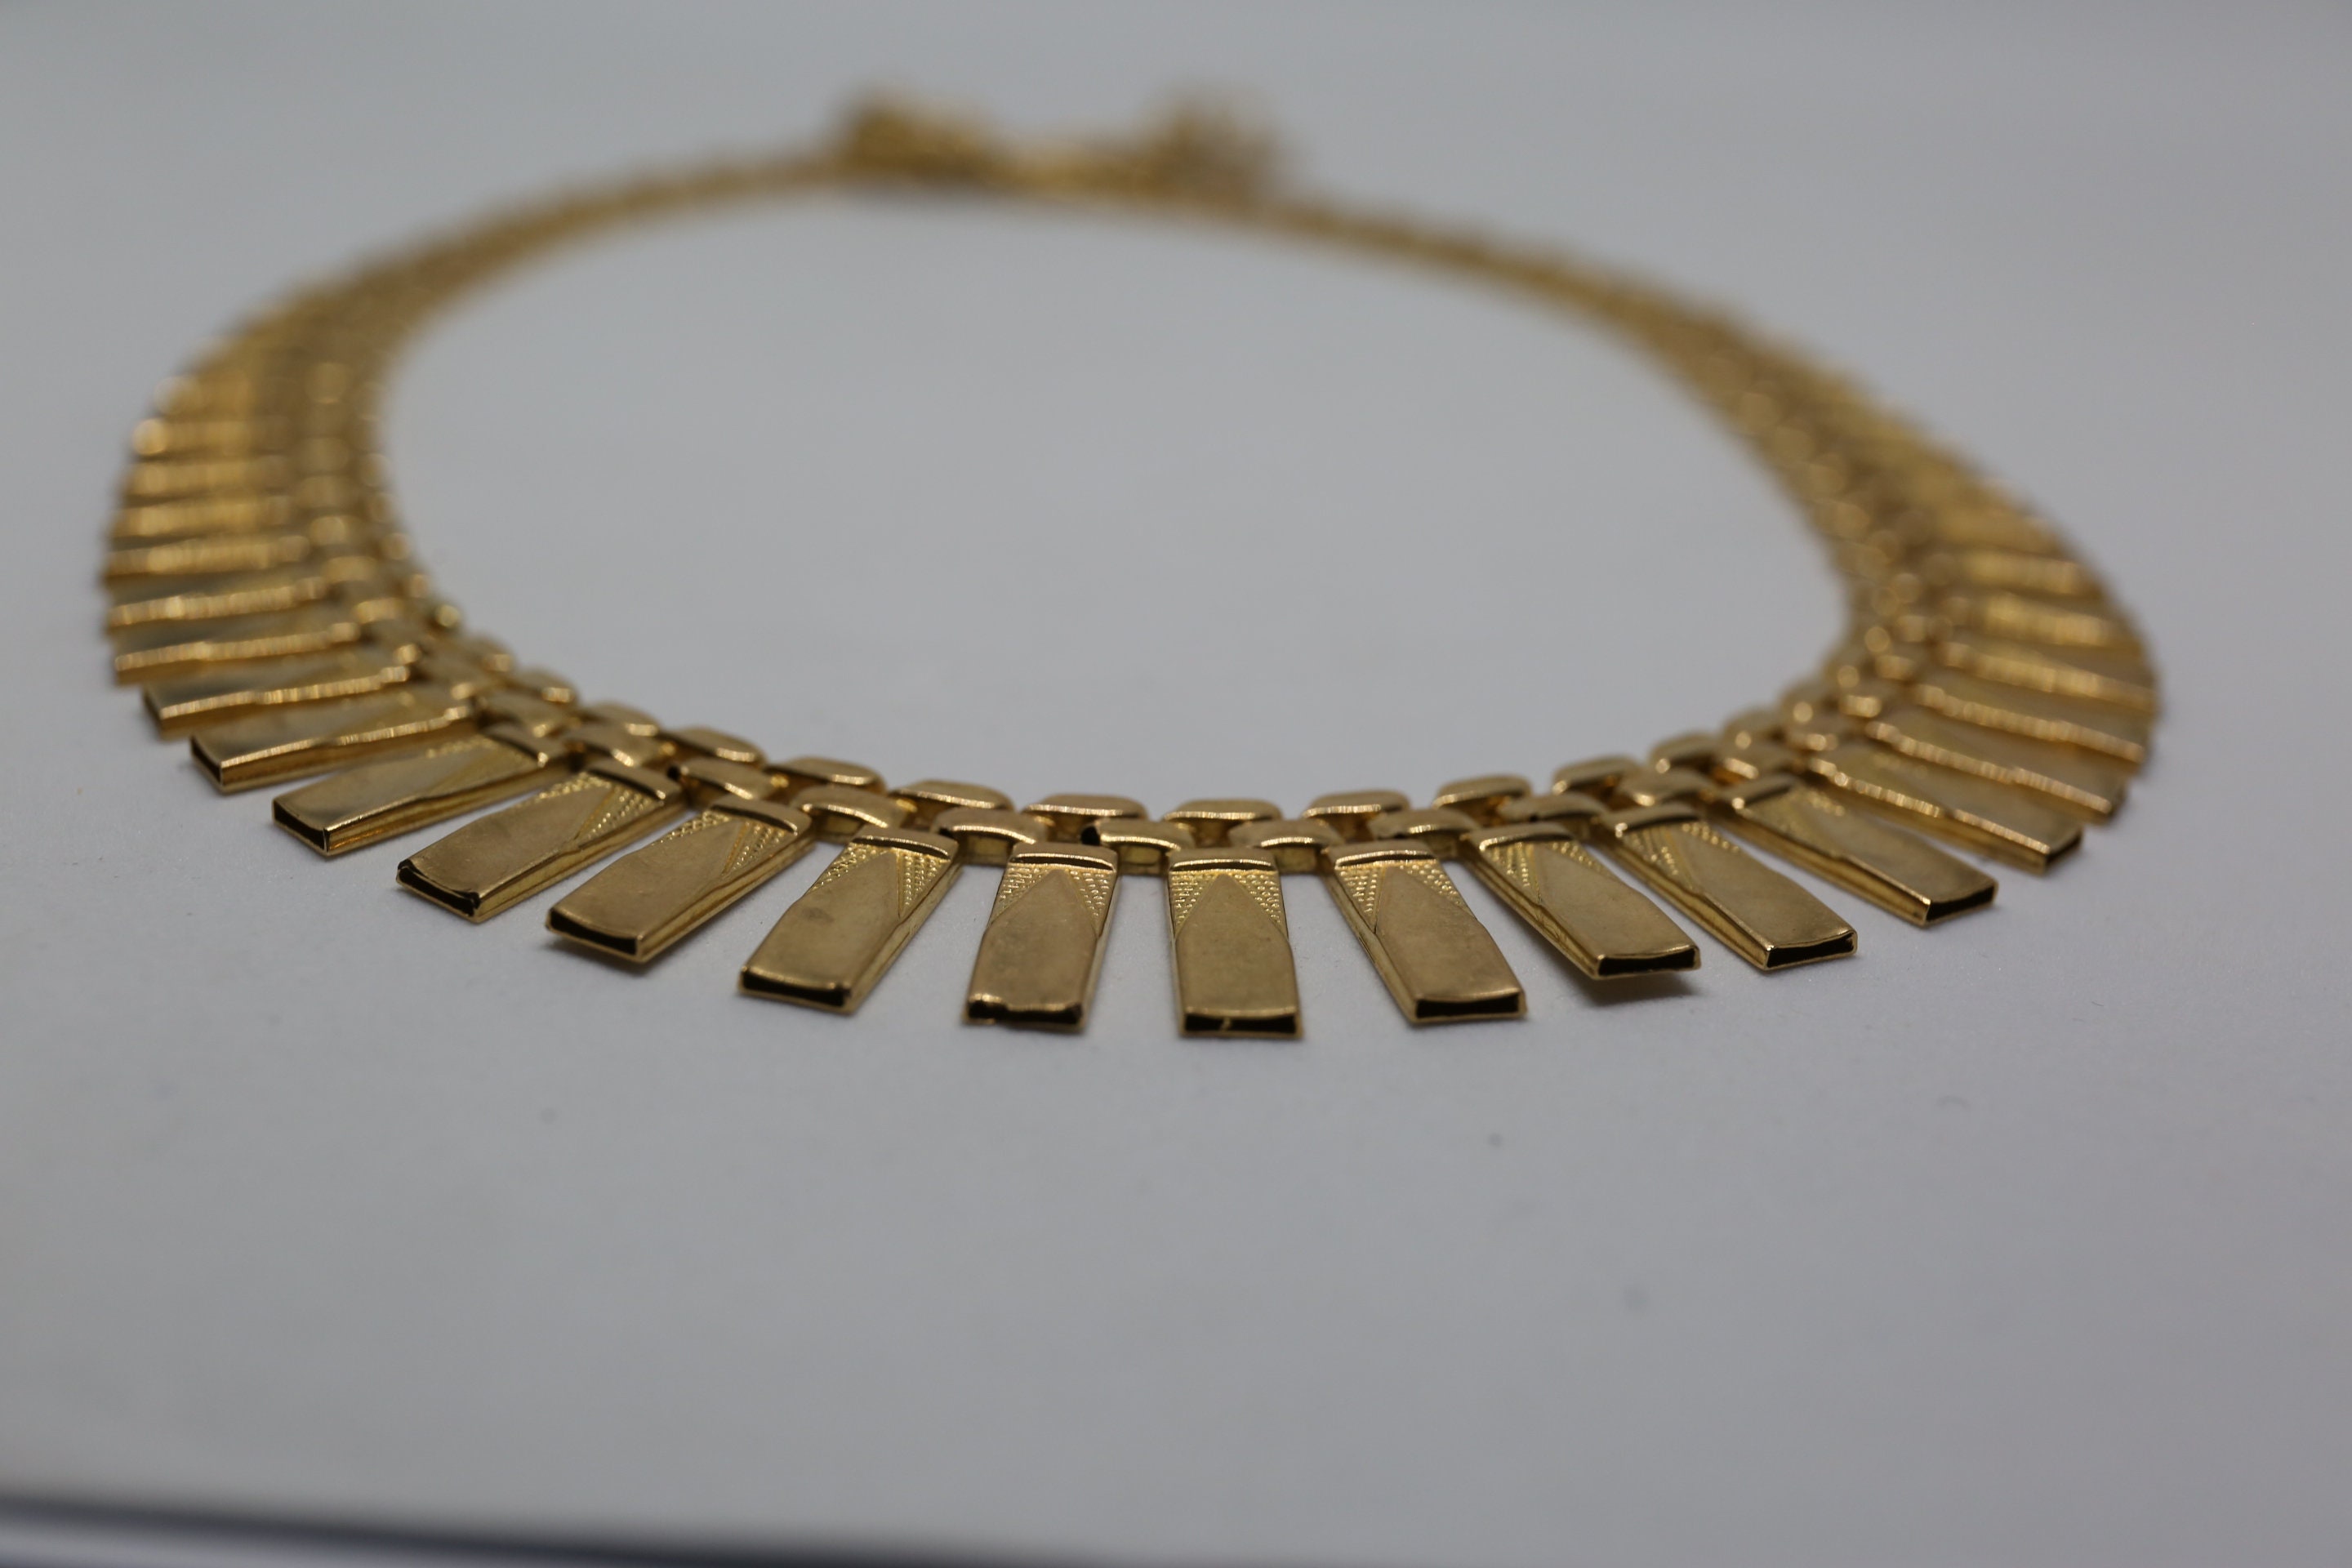 Cleopatra Necklace in 14K Gold - 17